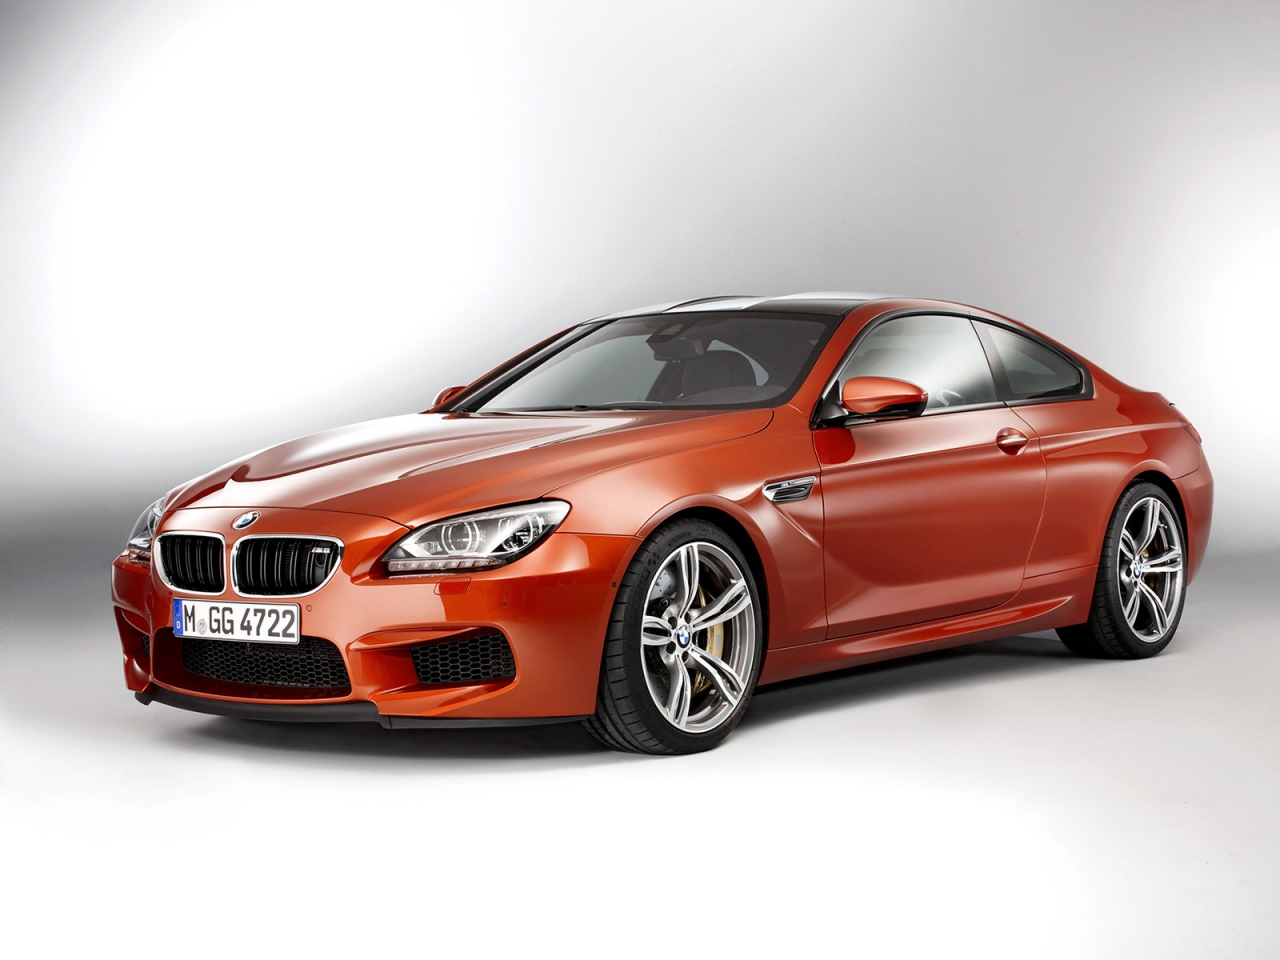 2013 BMW M6 Coupe Studio for 1280 x 960 resolution